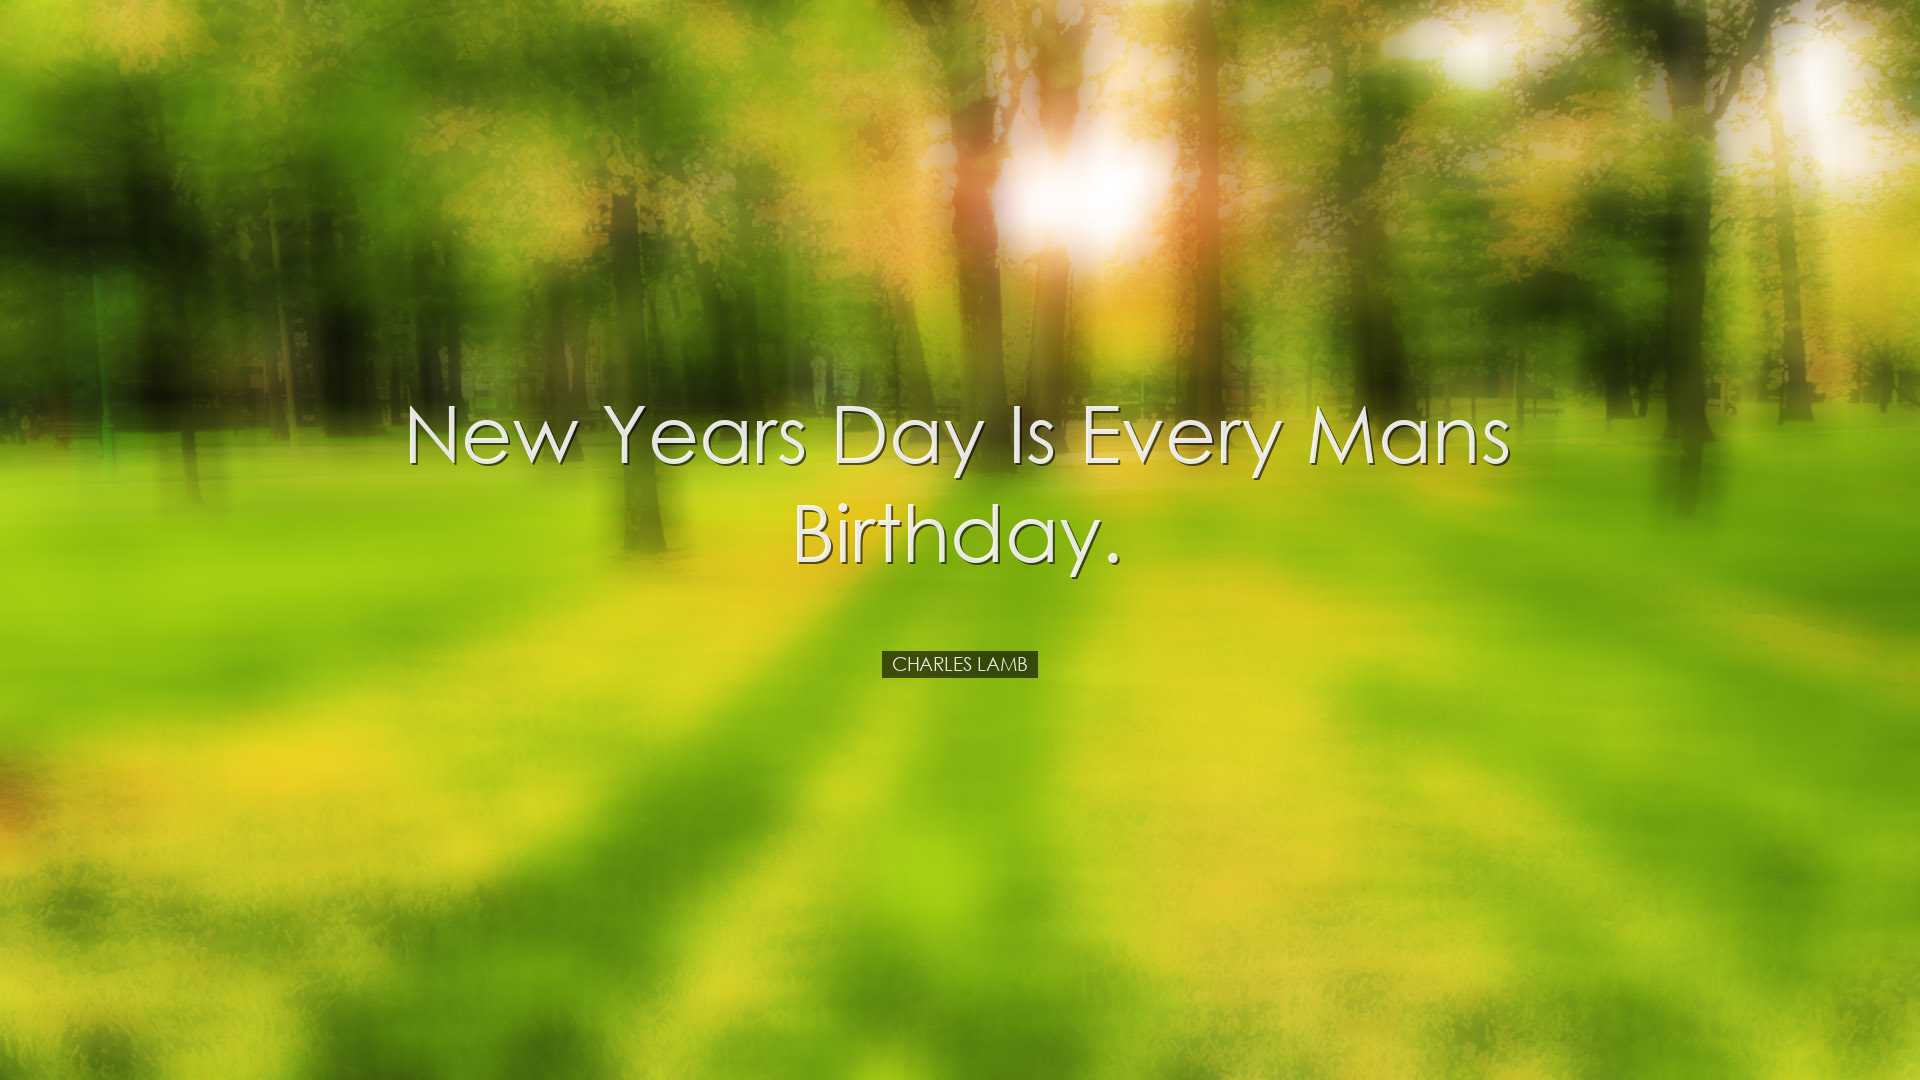 New Years Day is every mans birthday. - Charles Lamb